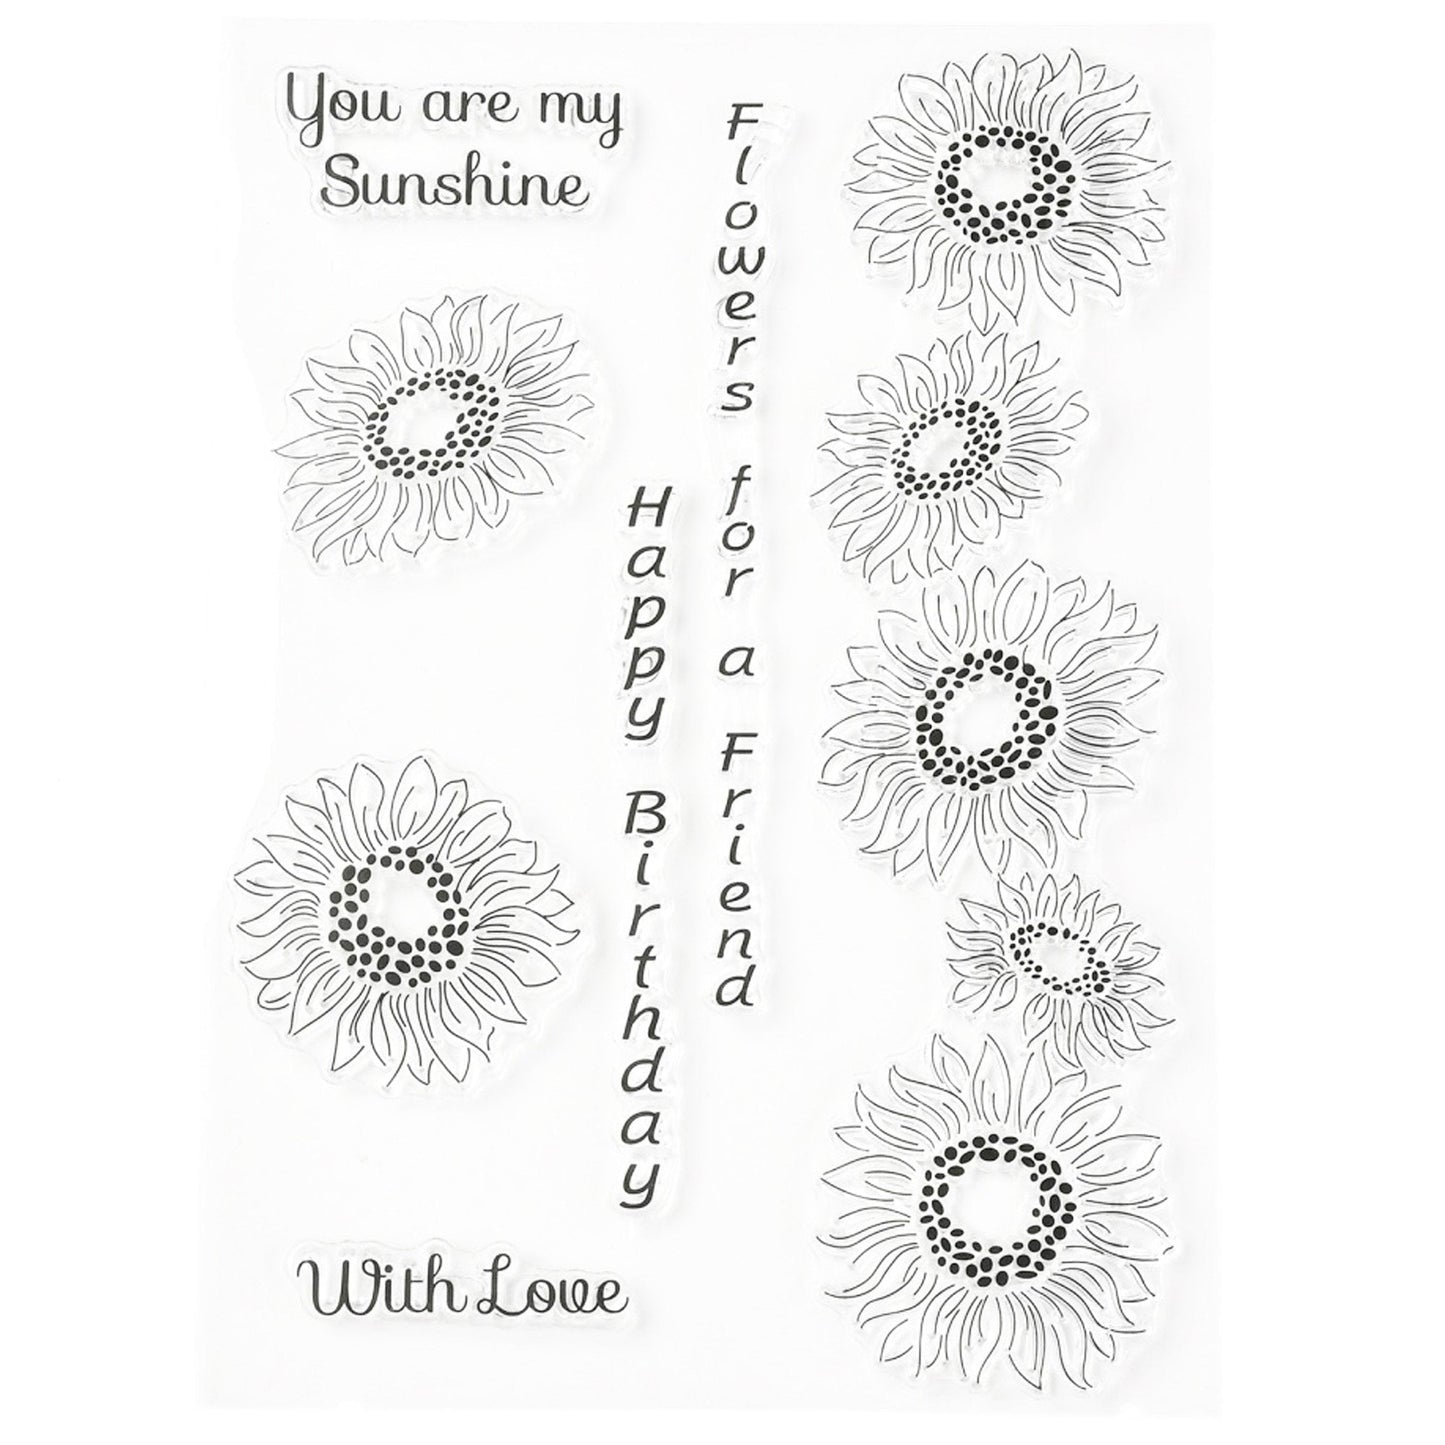 Sunflower Birthday Wishes Clear Stamp Silicone Rubber Scrapbooking Card Making